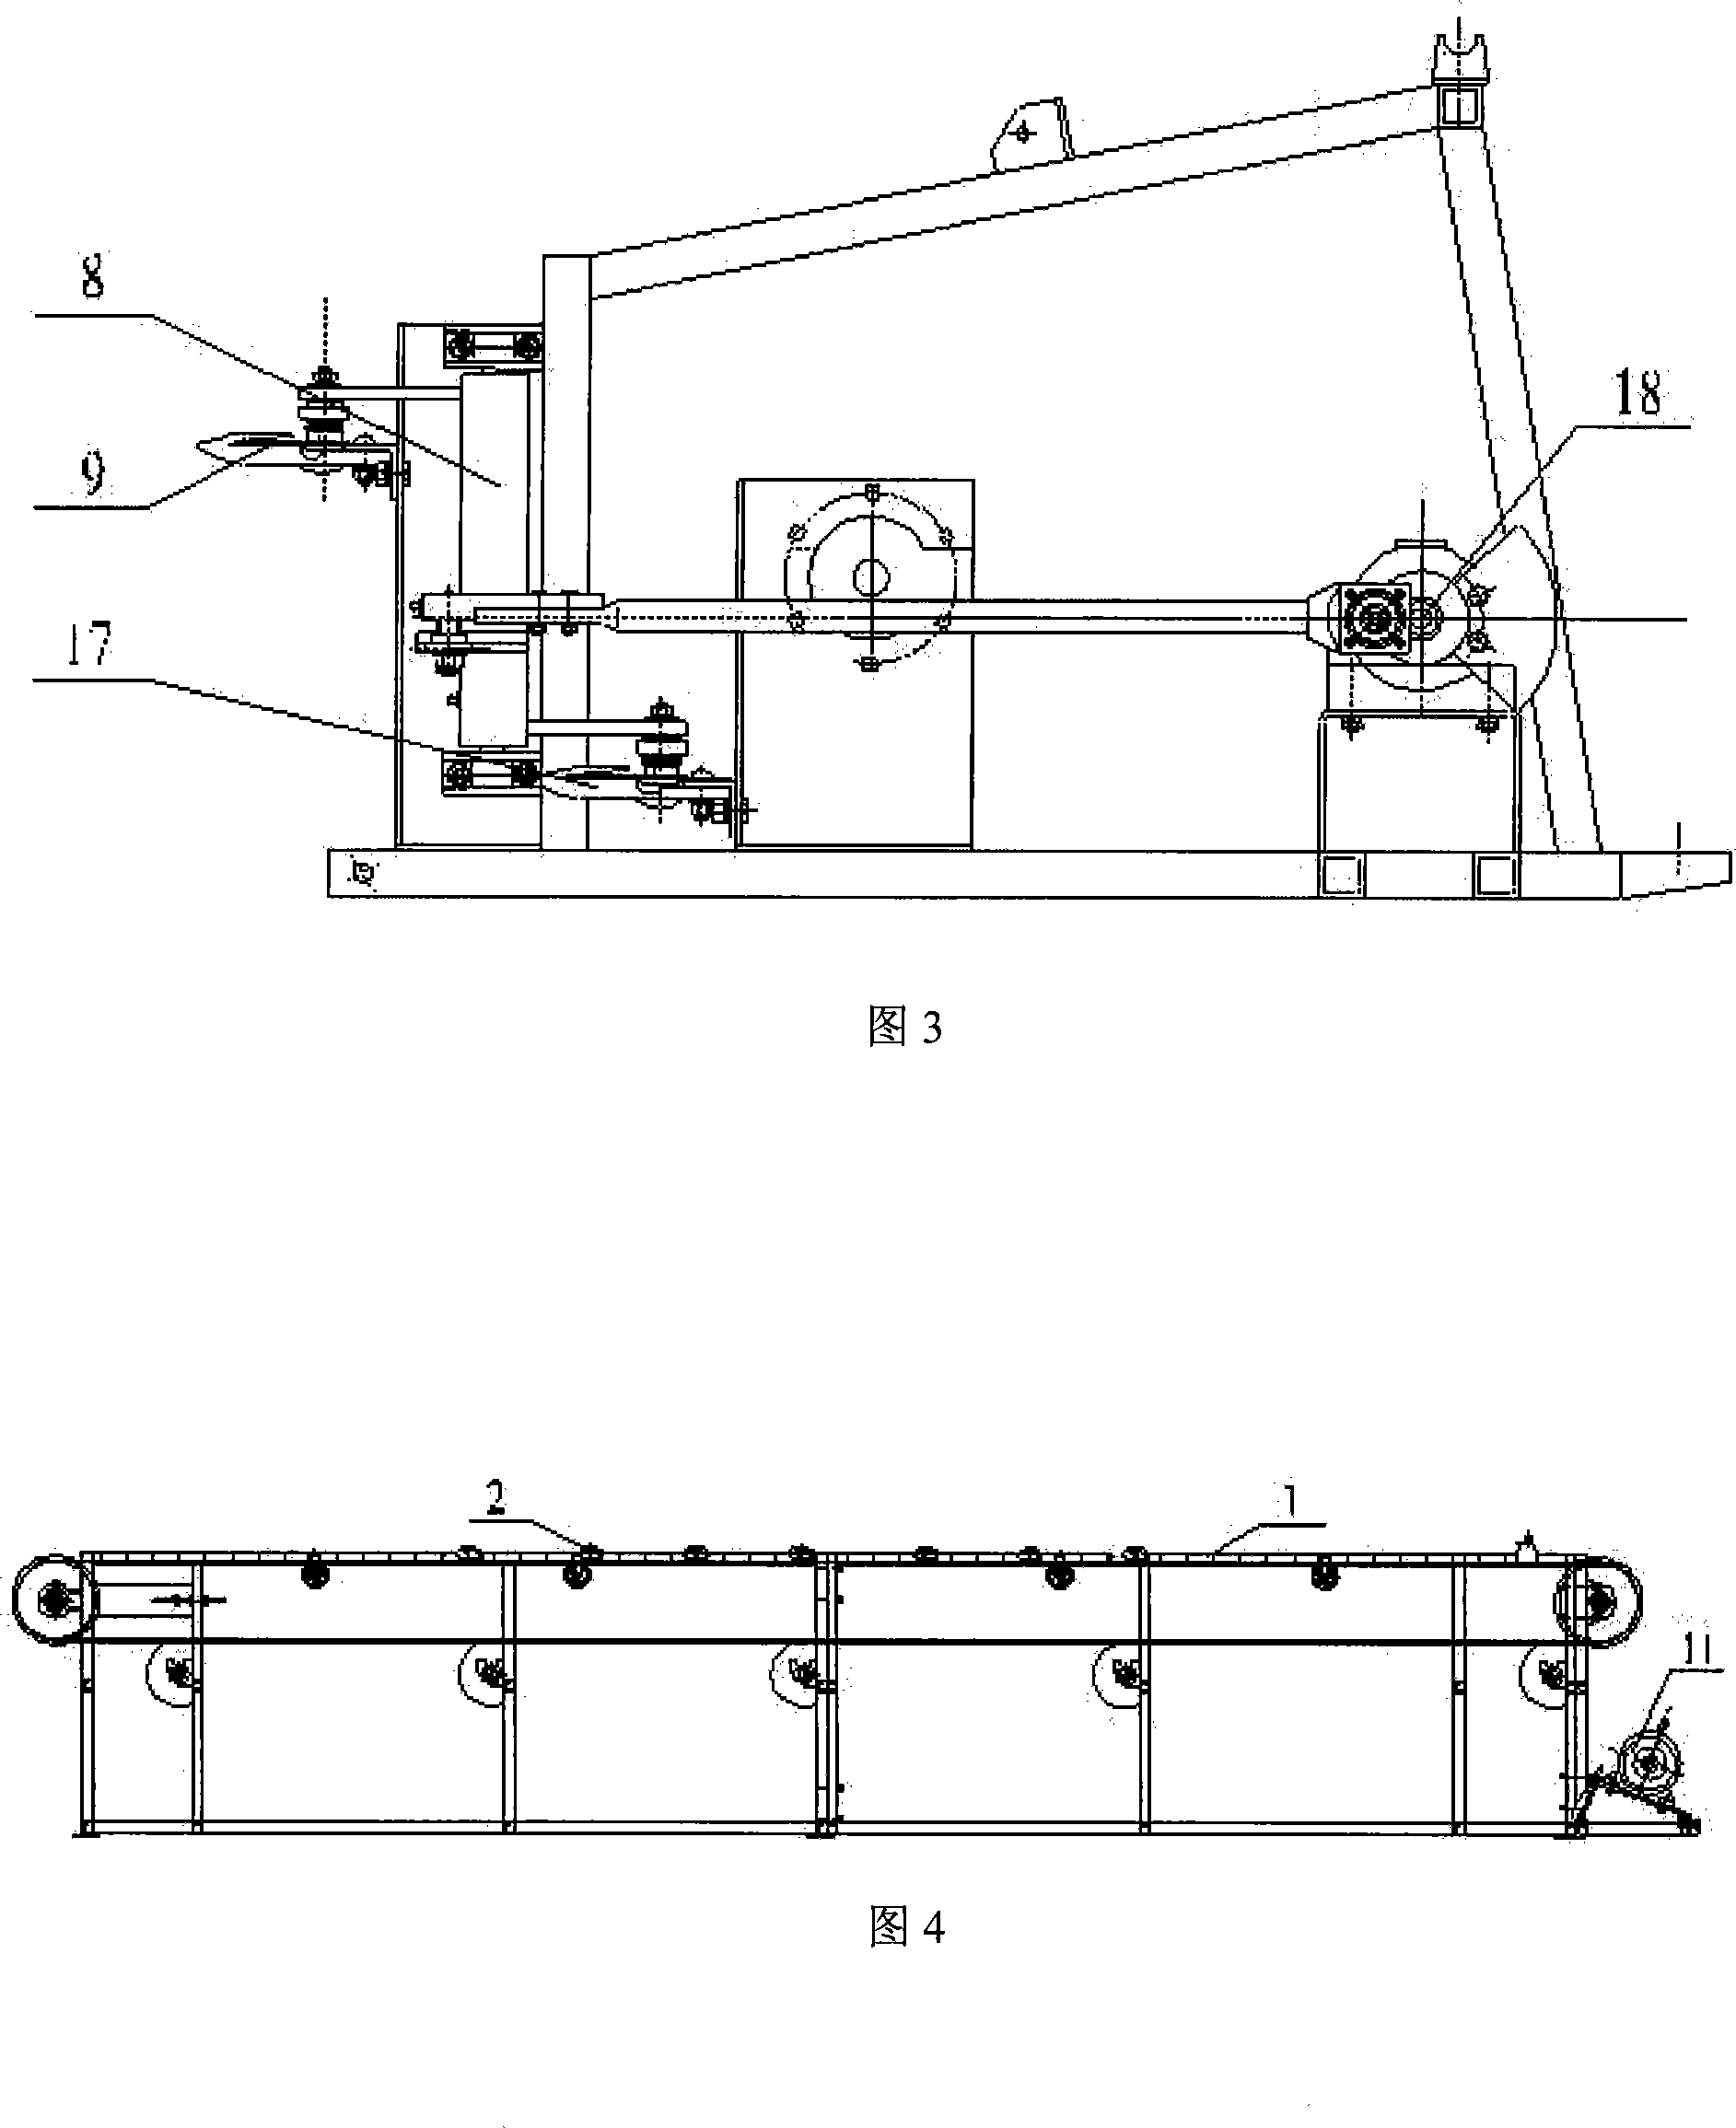 Stalk cutting test device and method